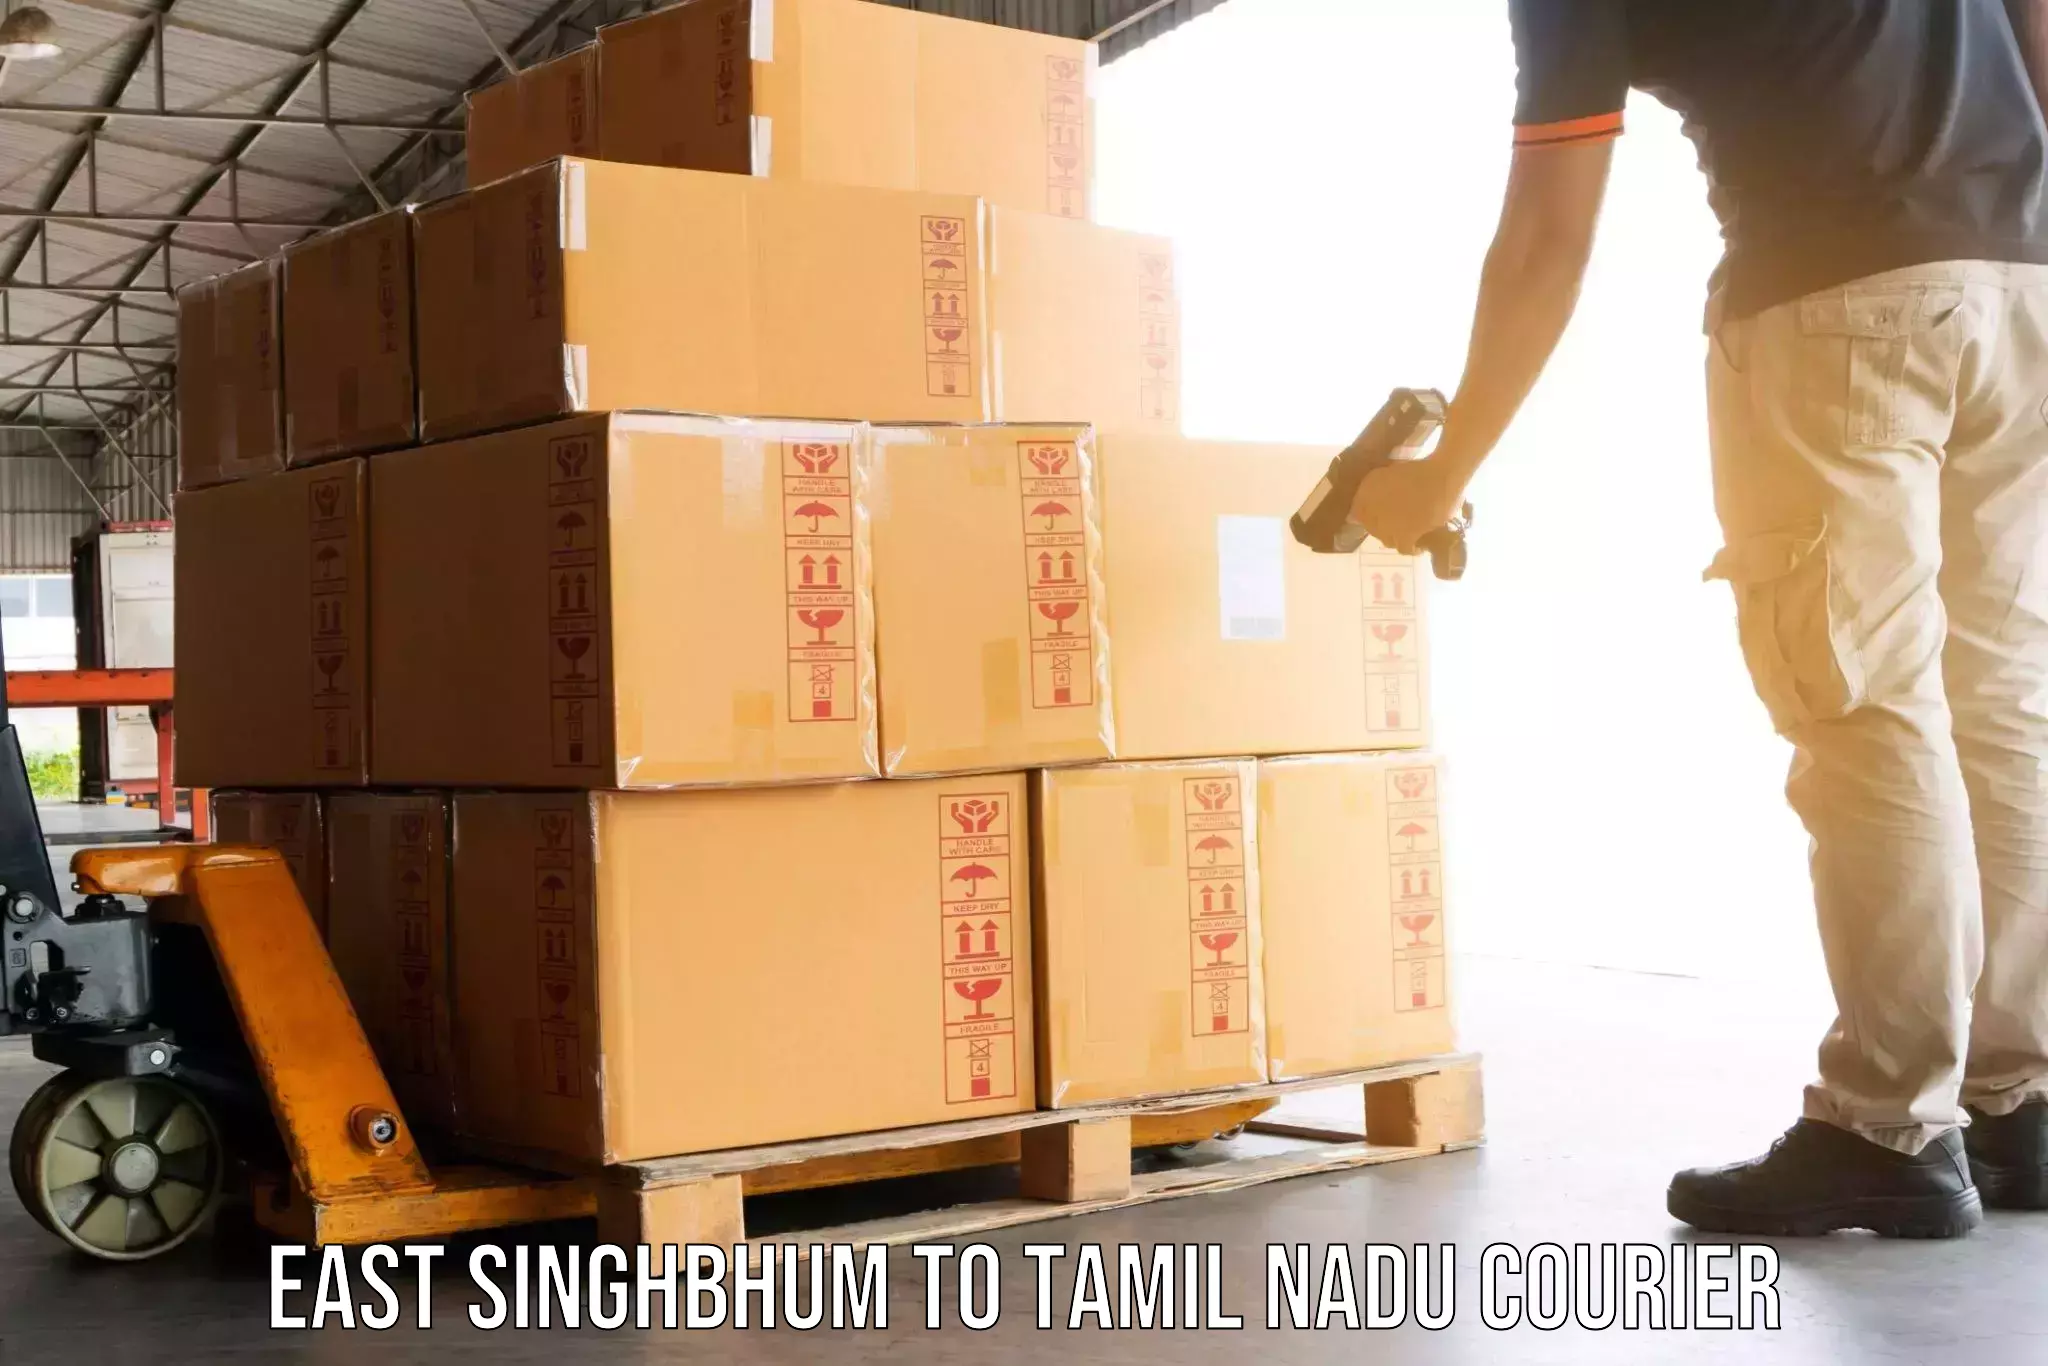 Efficient relocation services East Singhbhum to Sri Ramachandra Institute of Higher Education and Research Chennai